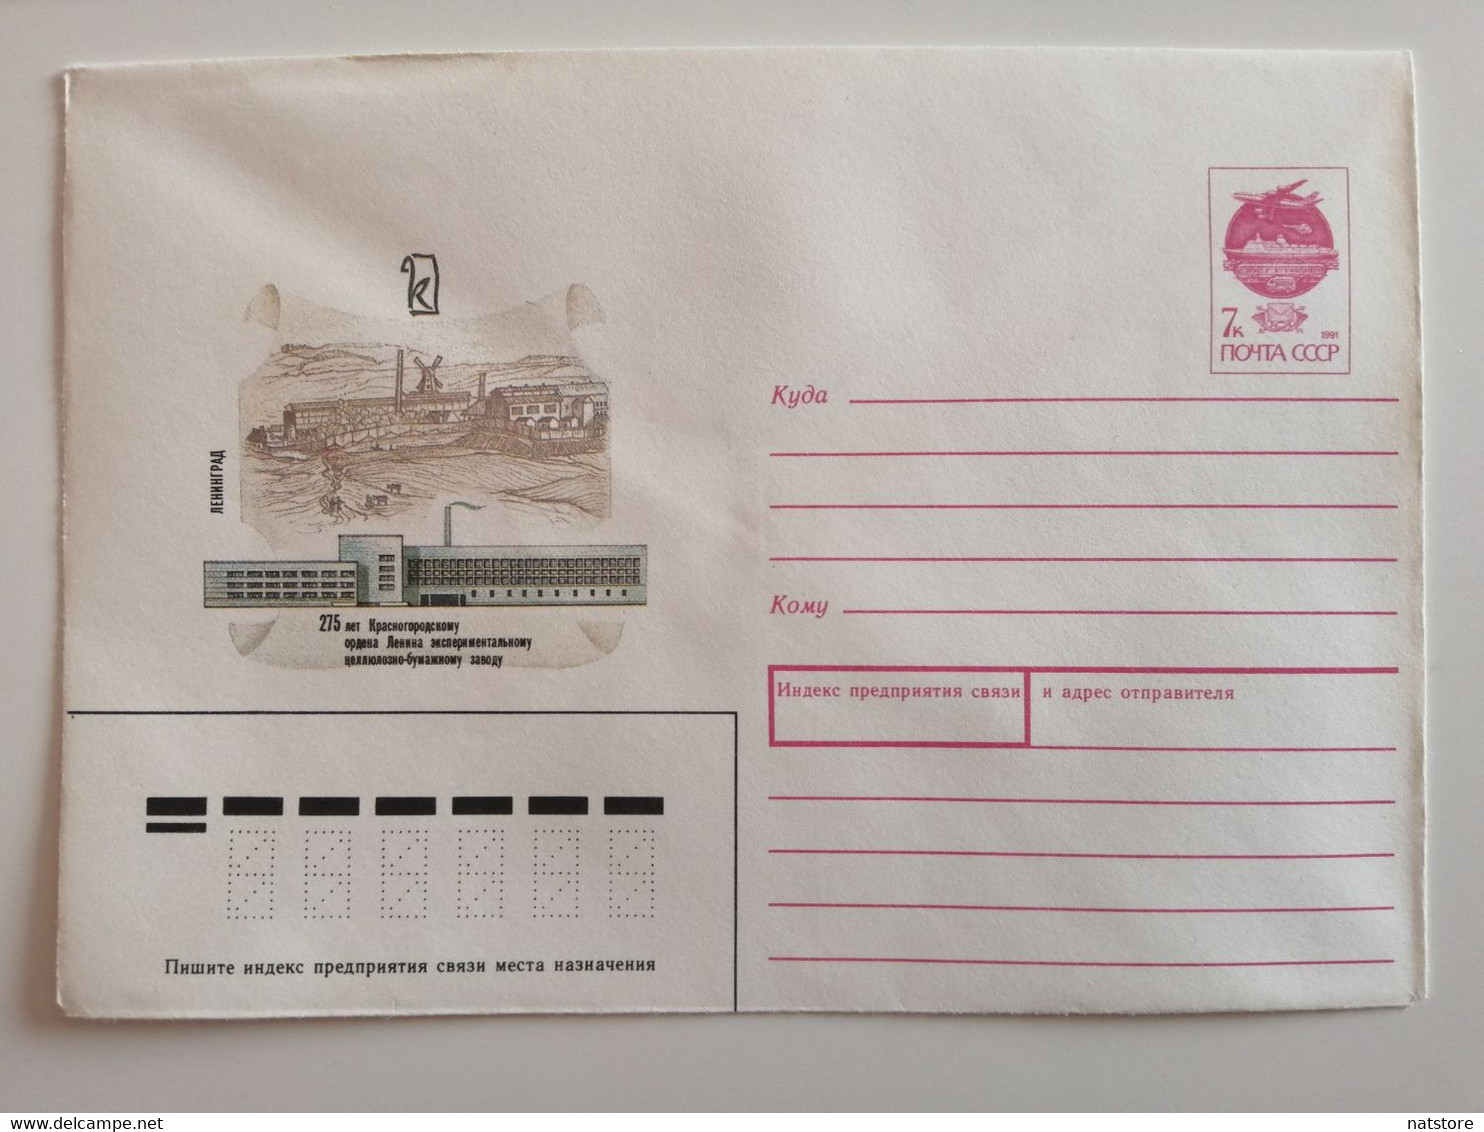 1991..USSR...COVER WITH PRINTED  STAMP..LENINGRAD..275 YEARS OF KRASNOGORODSKY EXPERIMENTAL PULP AND PAPER MILL - Usines & Industries